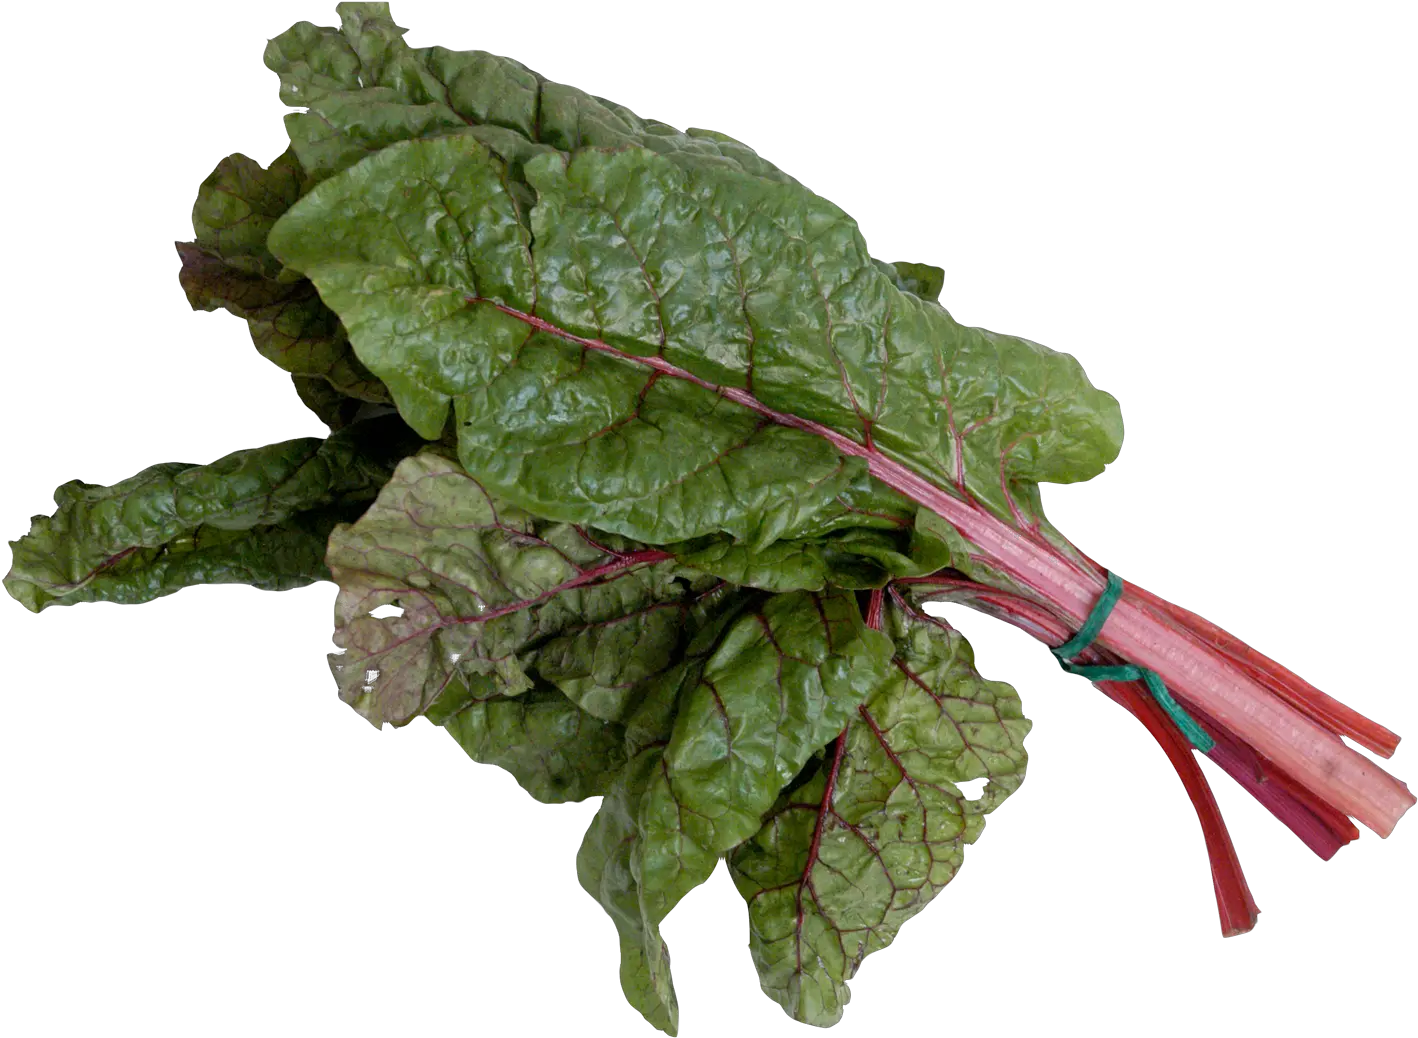 Download Mangold Or Swiss Chard Png Image For Free Beetroot Spinach Png